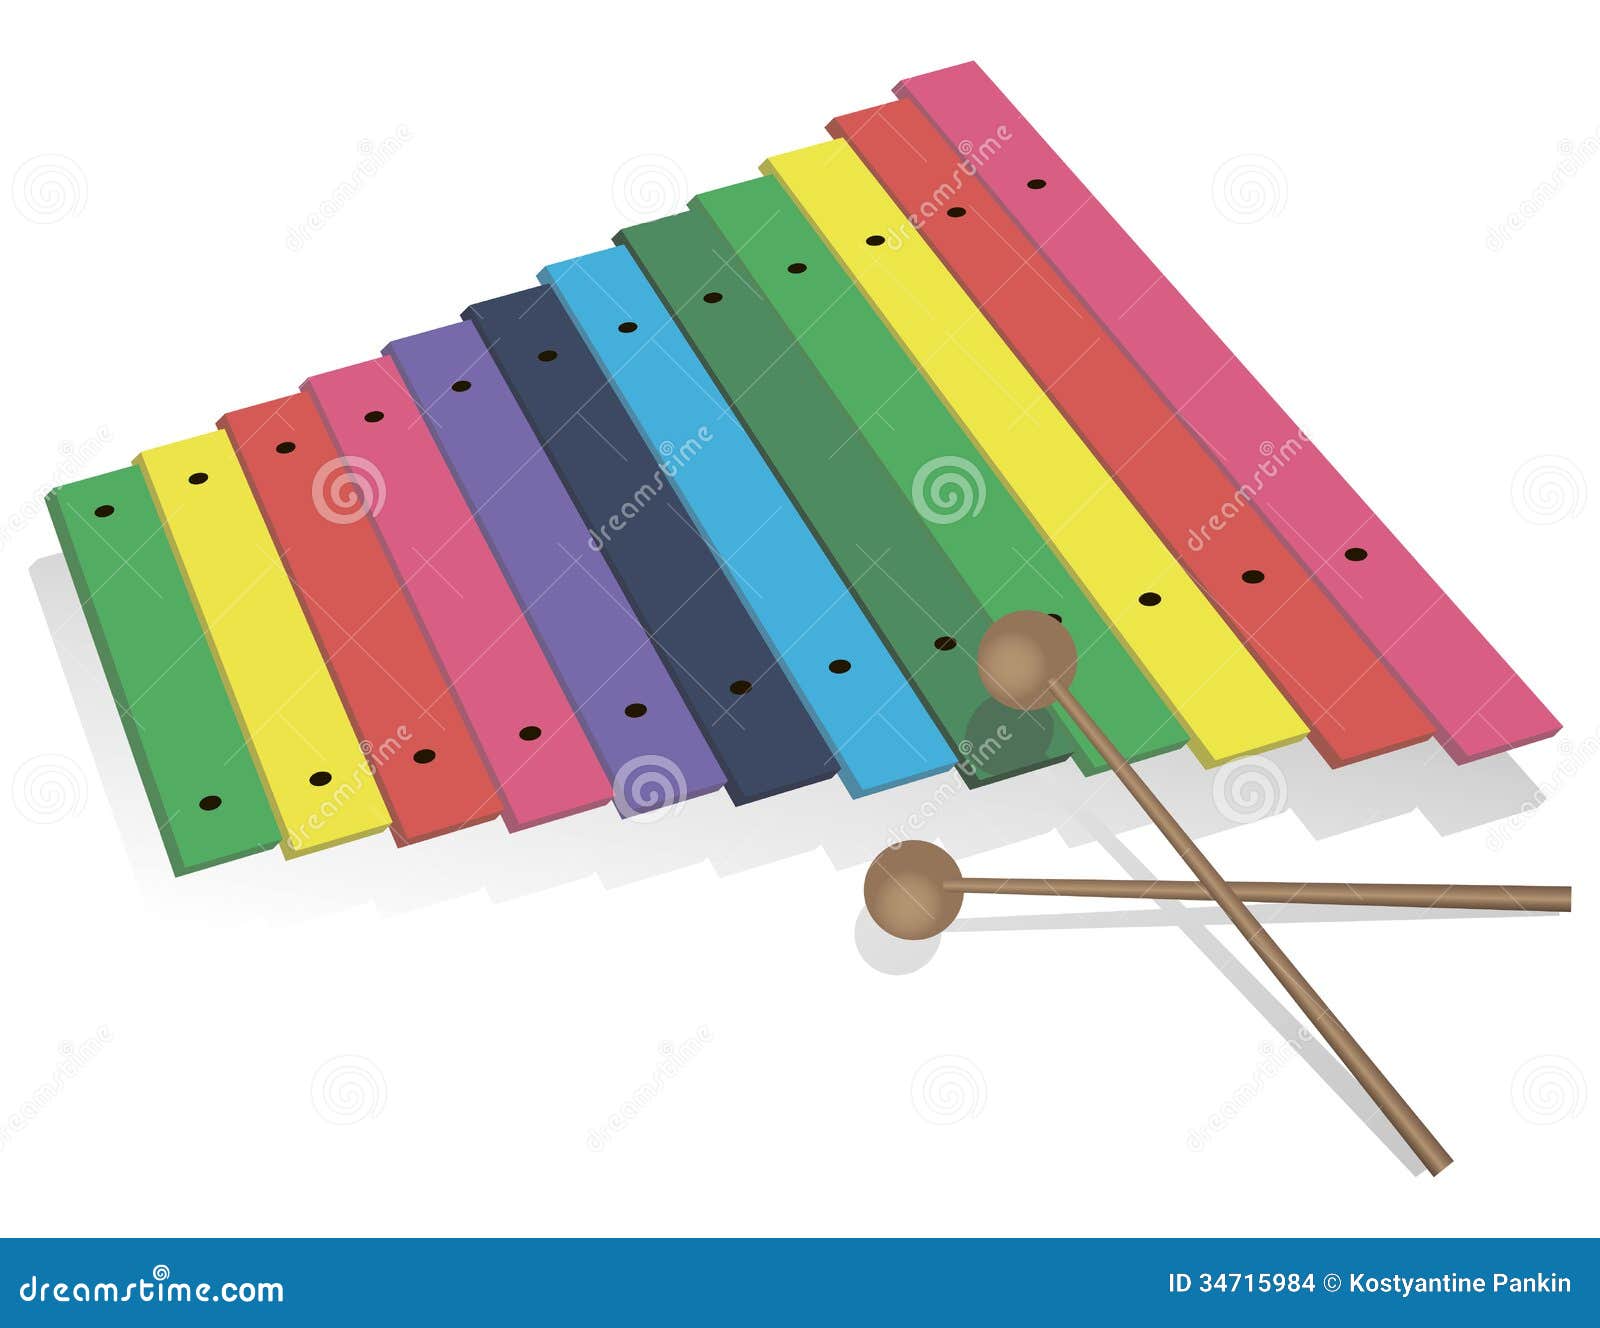 Option musical instrument - xylophone, childrens toy. Vector 